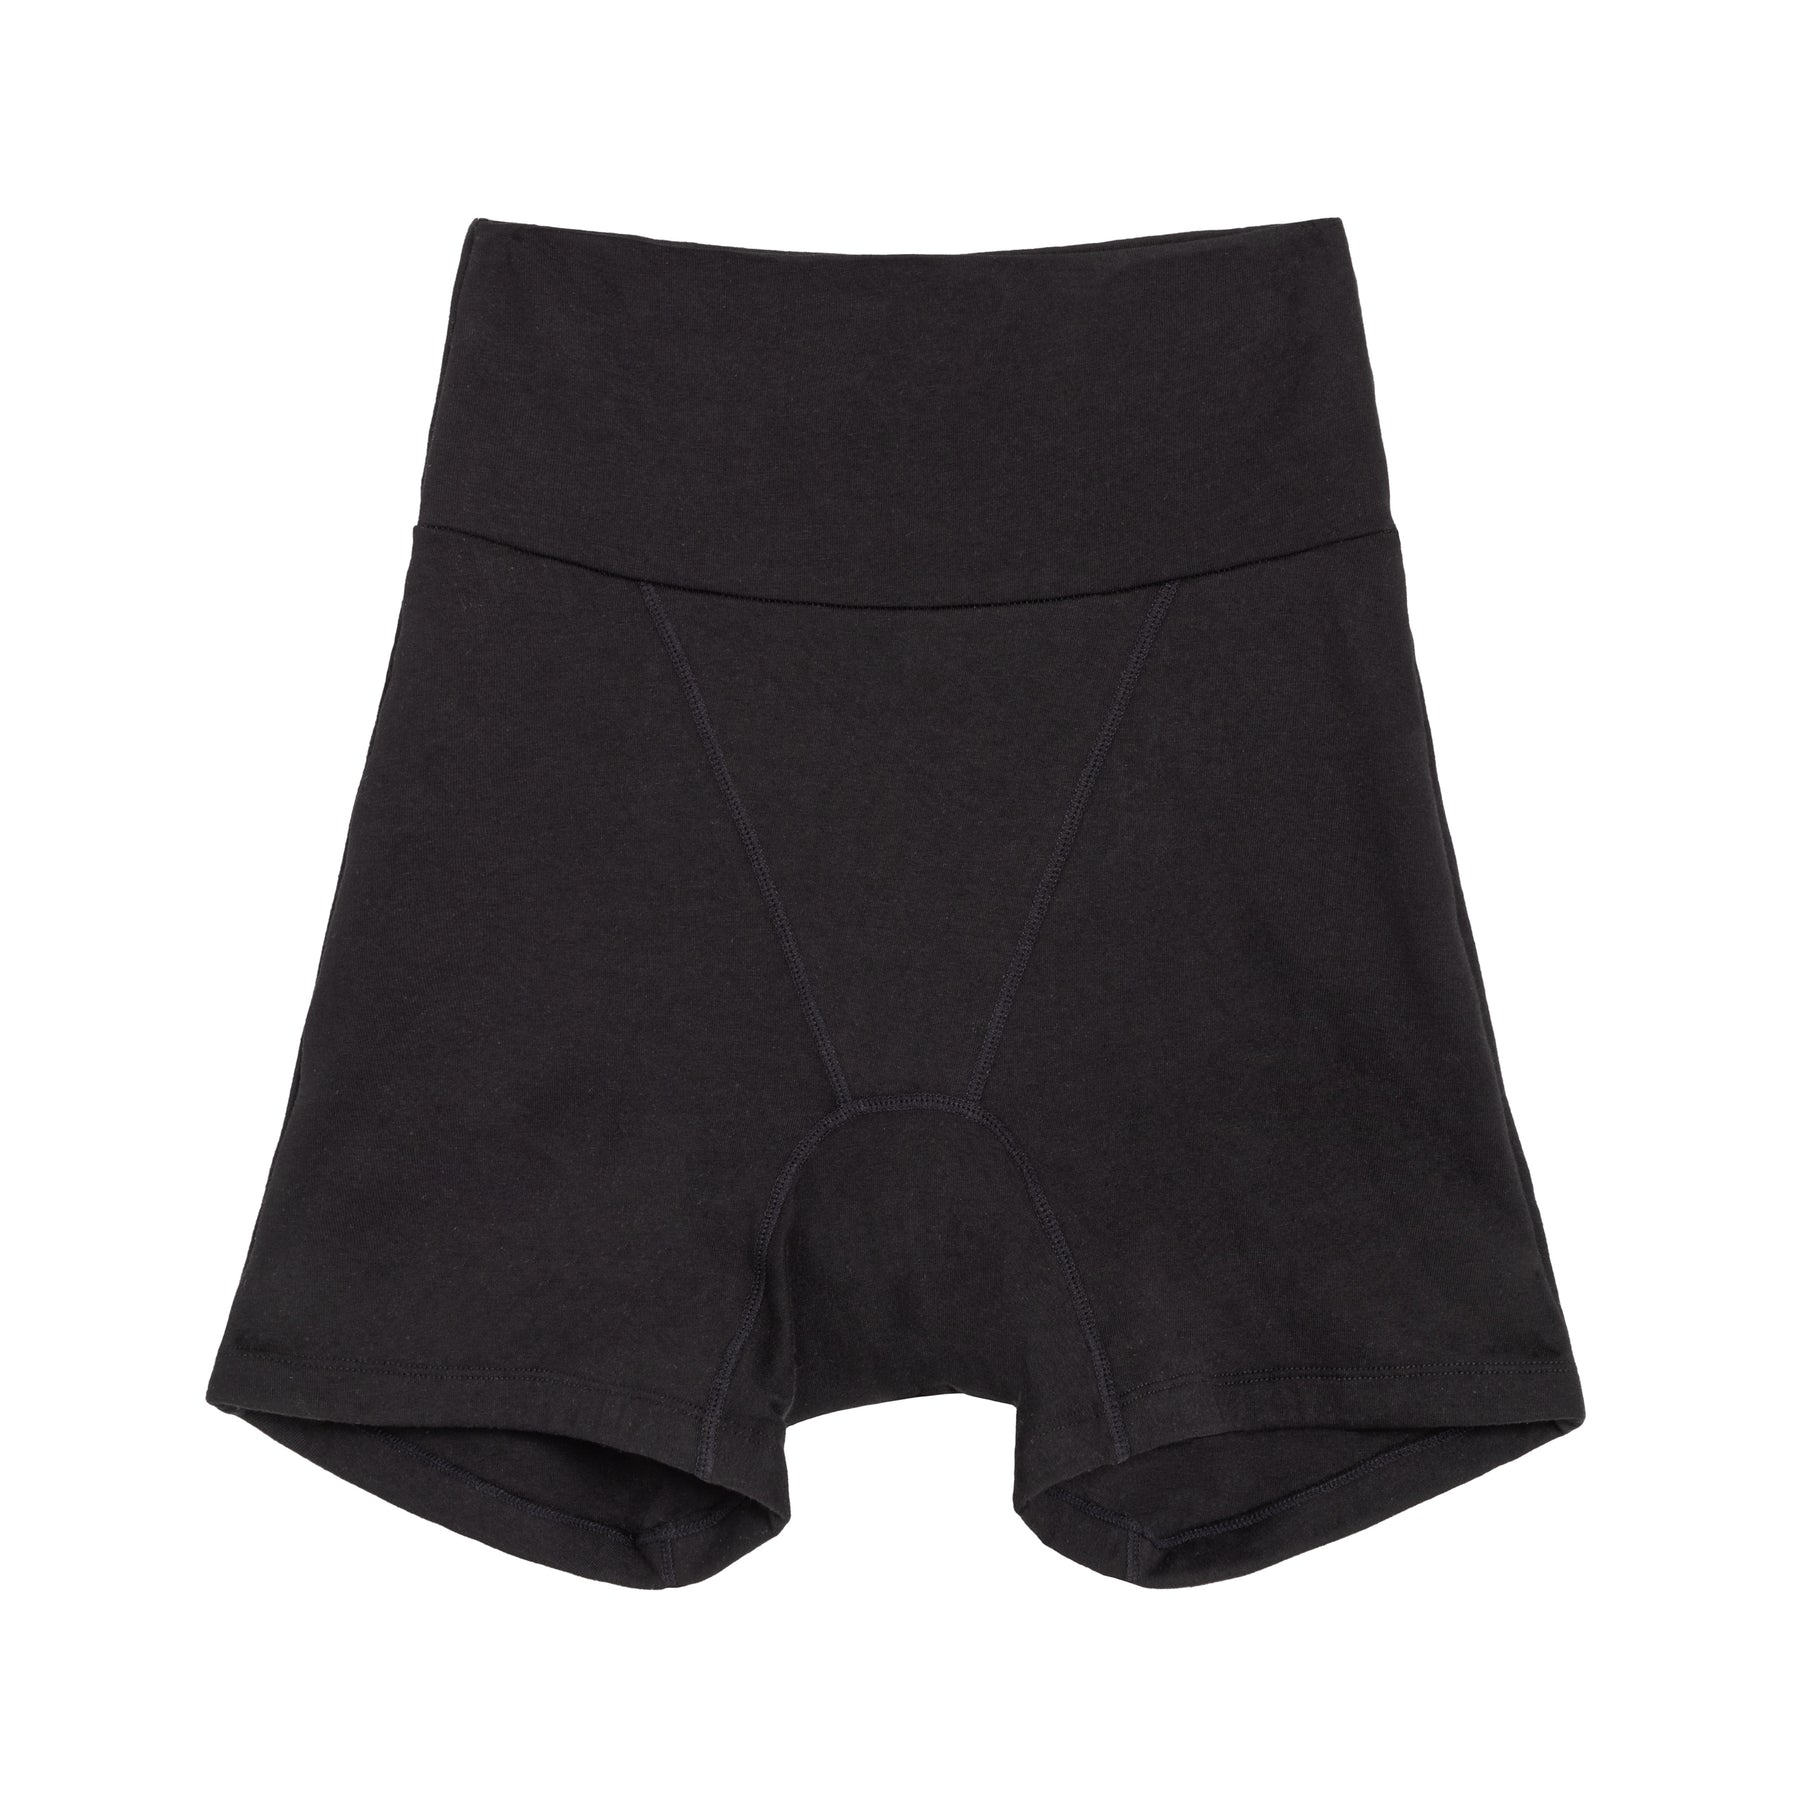 Urban Outfitters The Period Company Sleeper Underwear